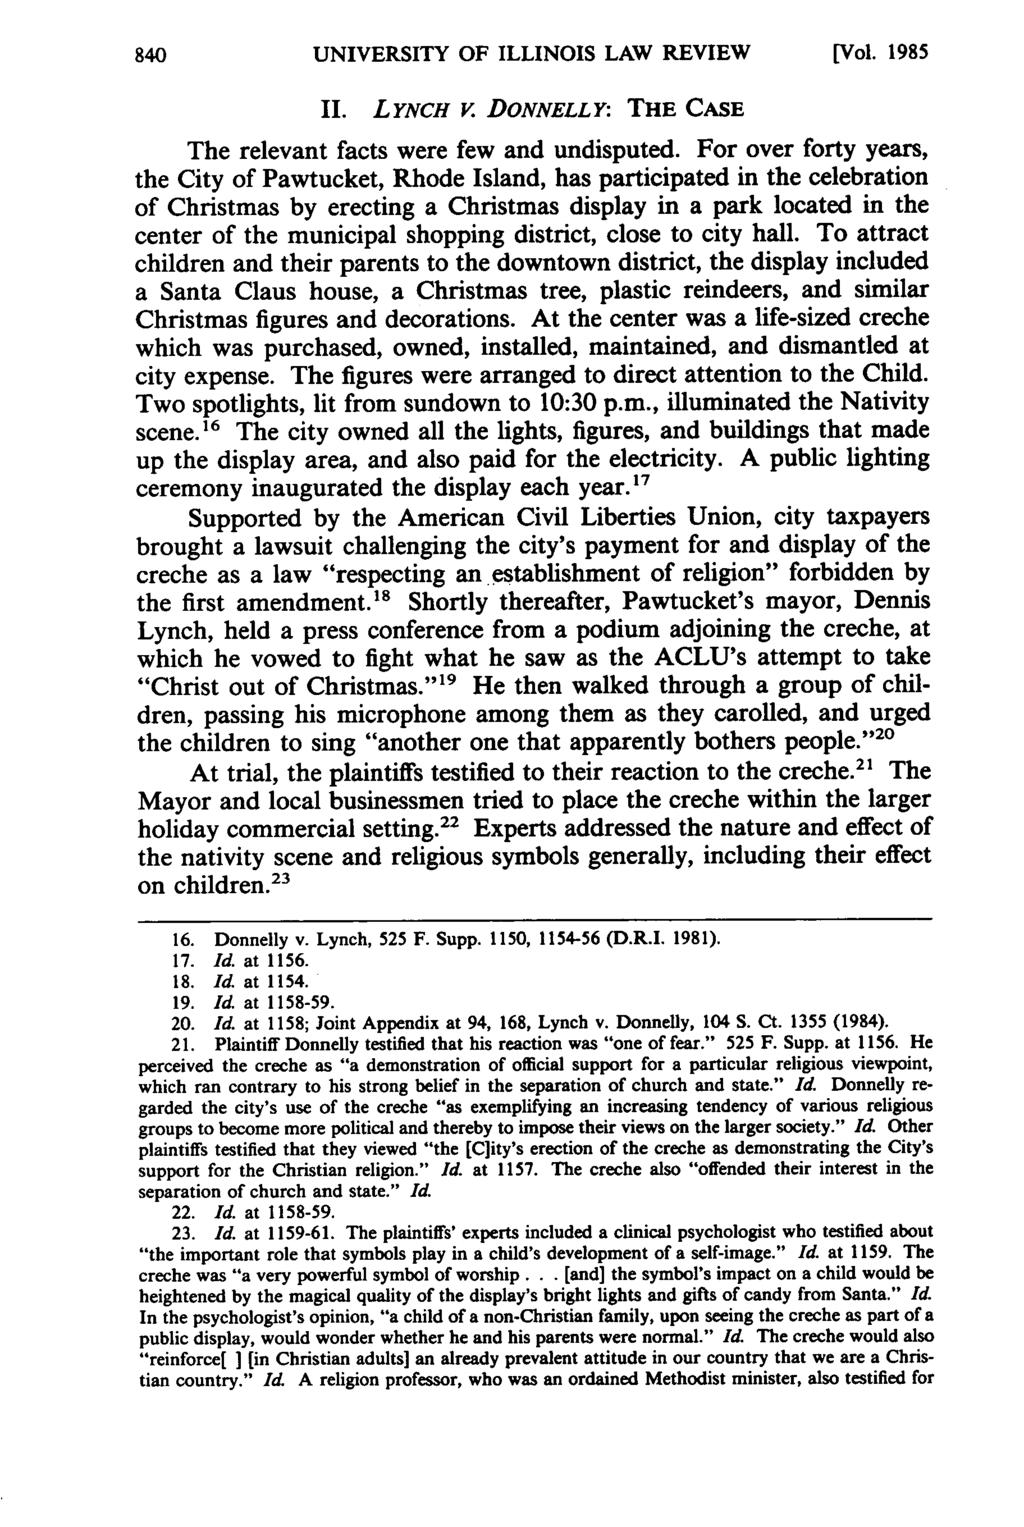 UNIVERSITY OF ILLINOIS LAW REVIEW [V/ol. 1985 II. LYNCH V. DONNELLY: THE CASE The relevant facts were few and undisputed.